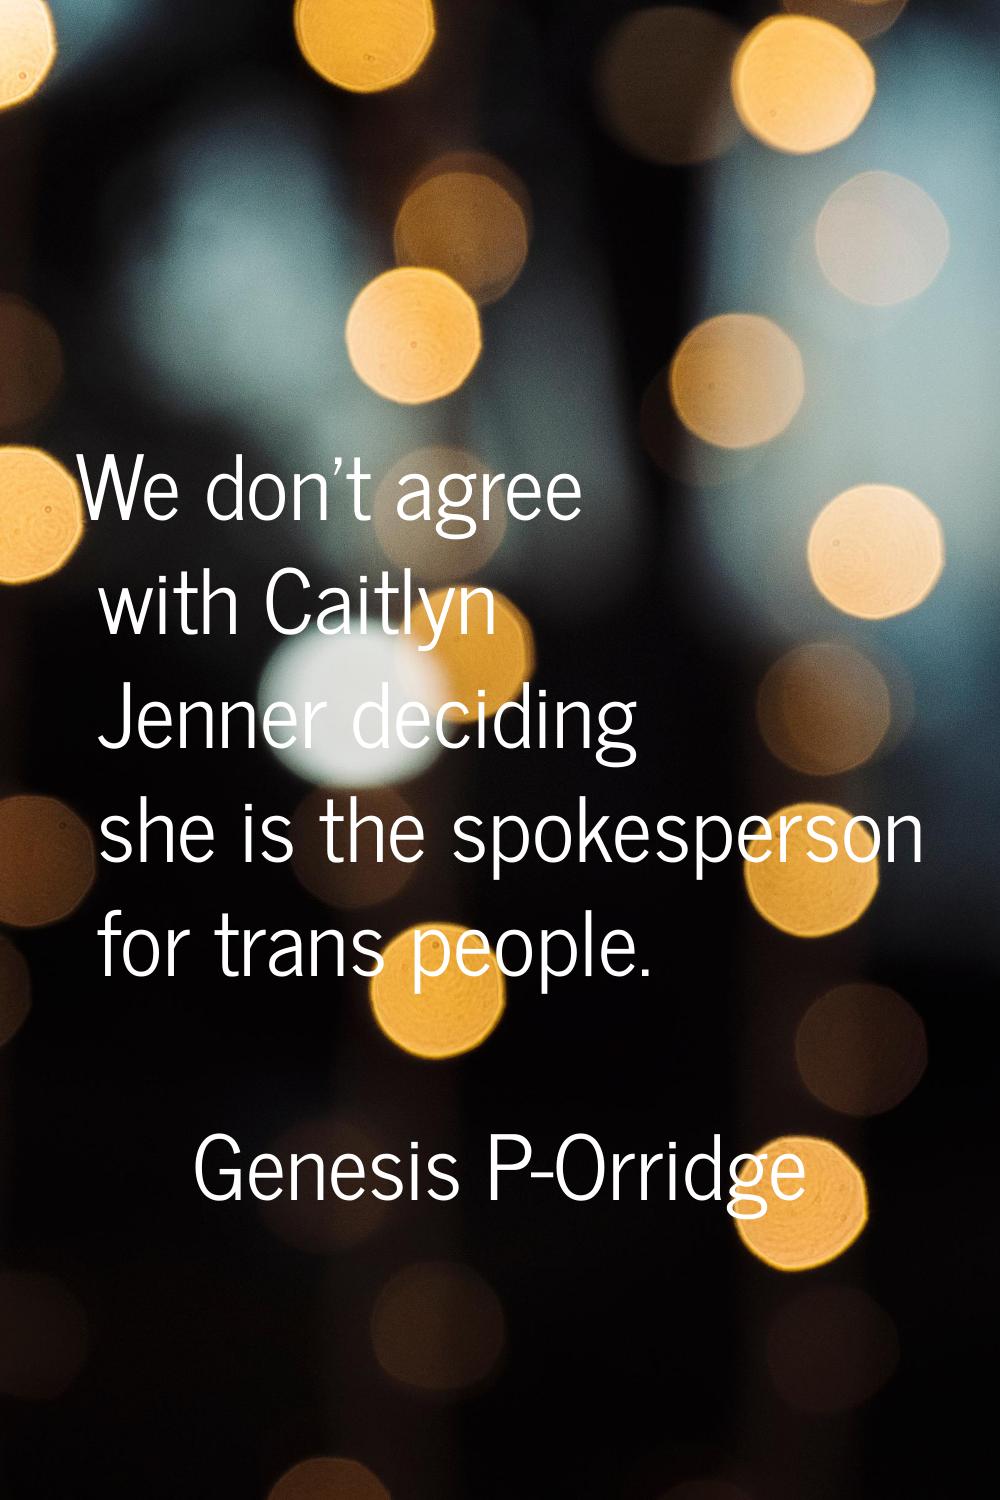 We don't agree with Caitlyn Jenner deciding she is the spokesperson for trans people.